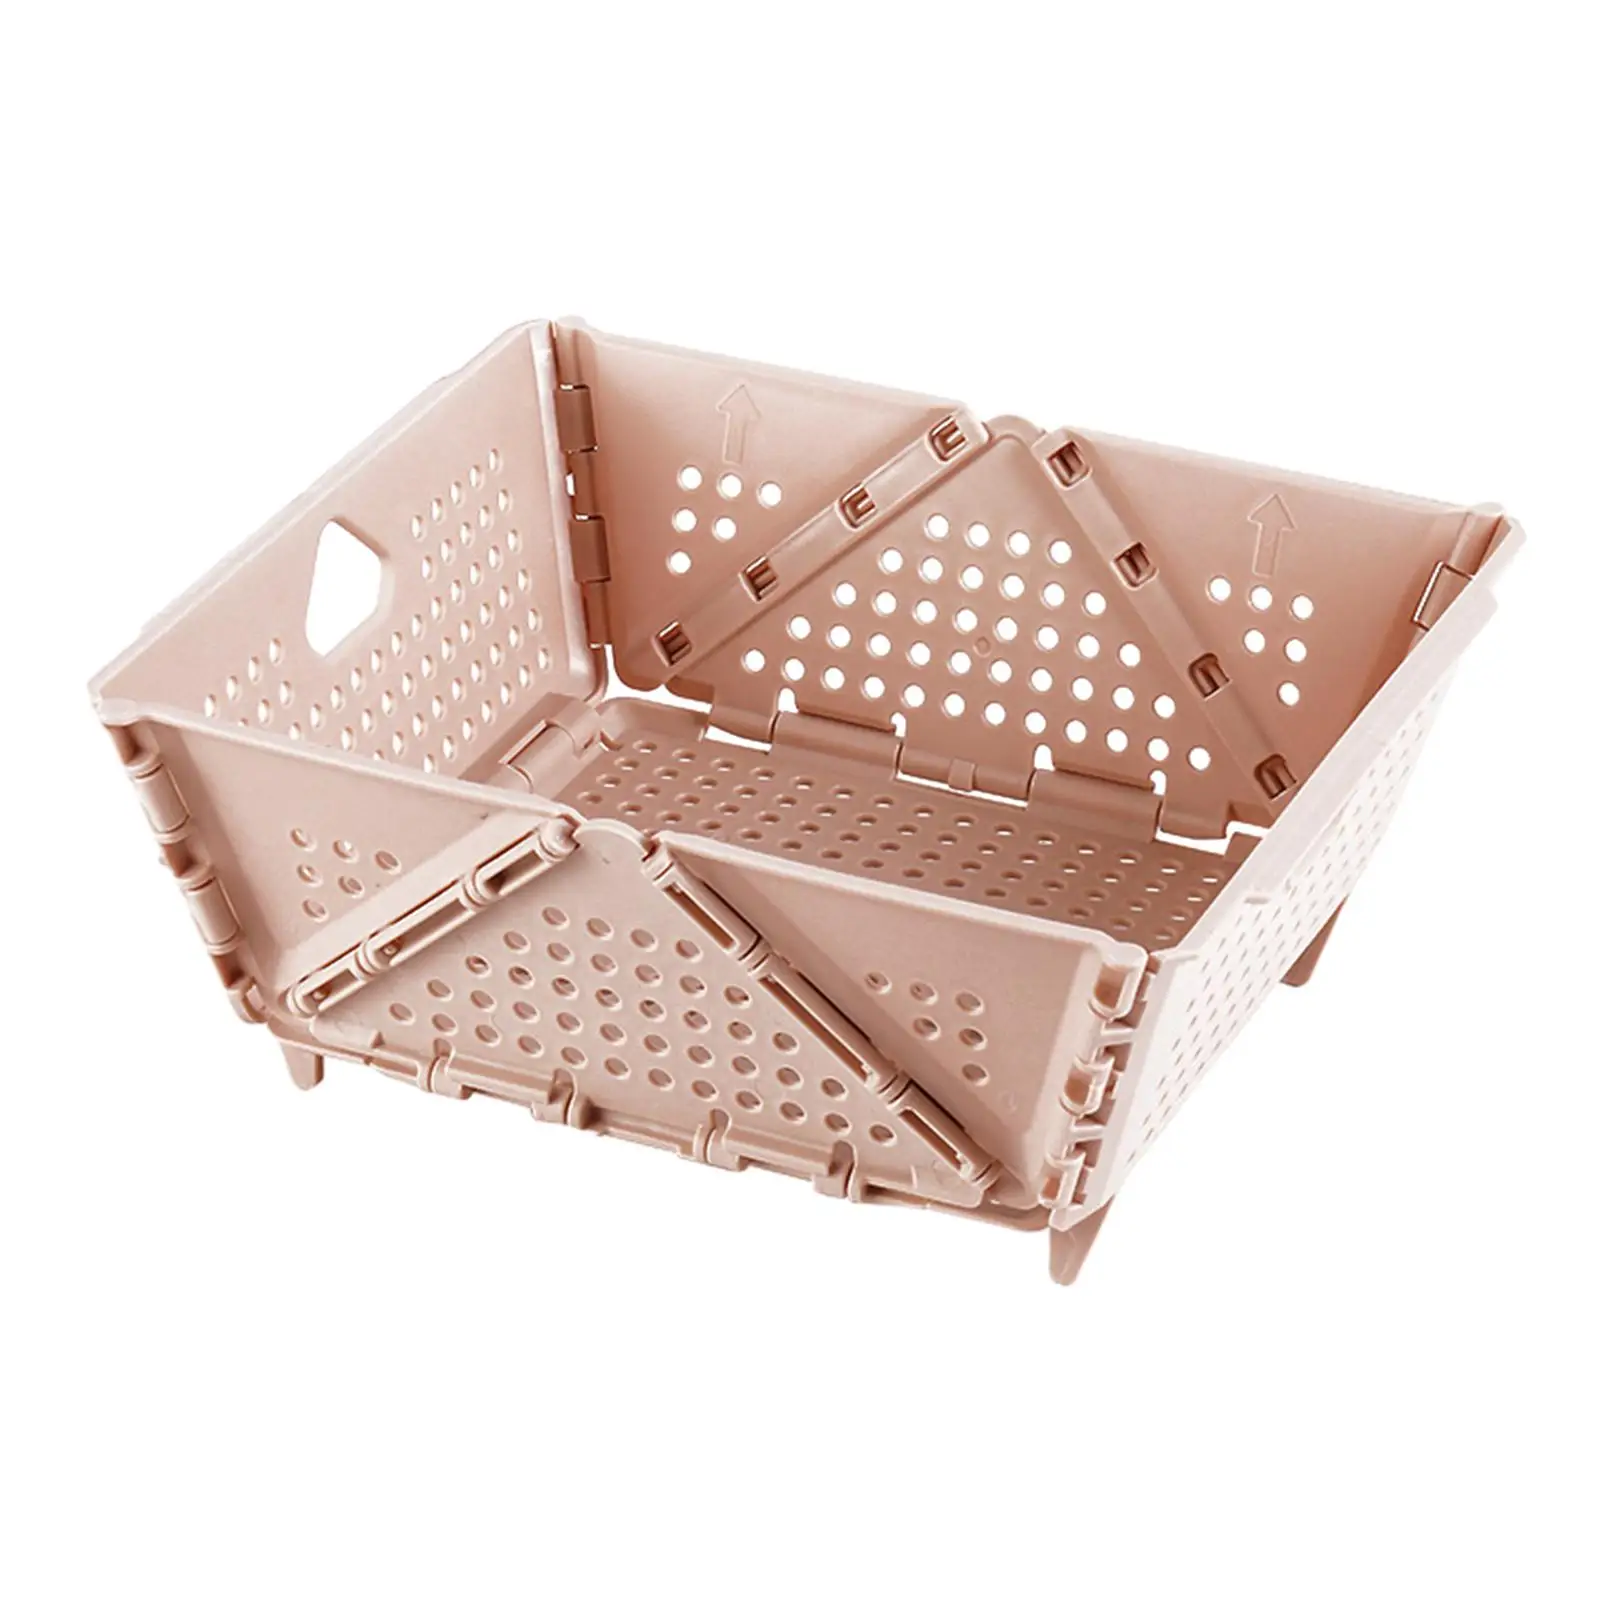 Folding Basket 23x20cm with Stand Base Multipurpose Container Collapsible Crates for Office Bedroom Livingroom Bathroom Kitchen